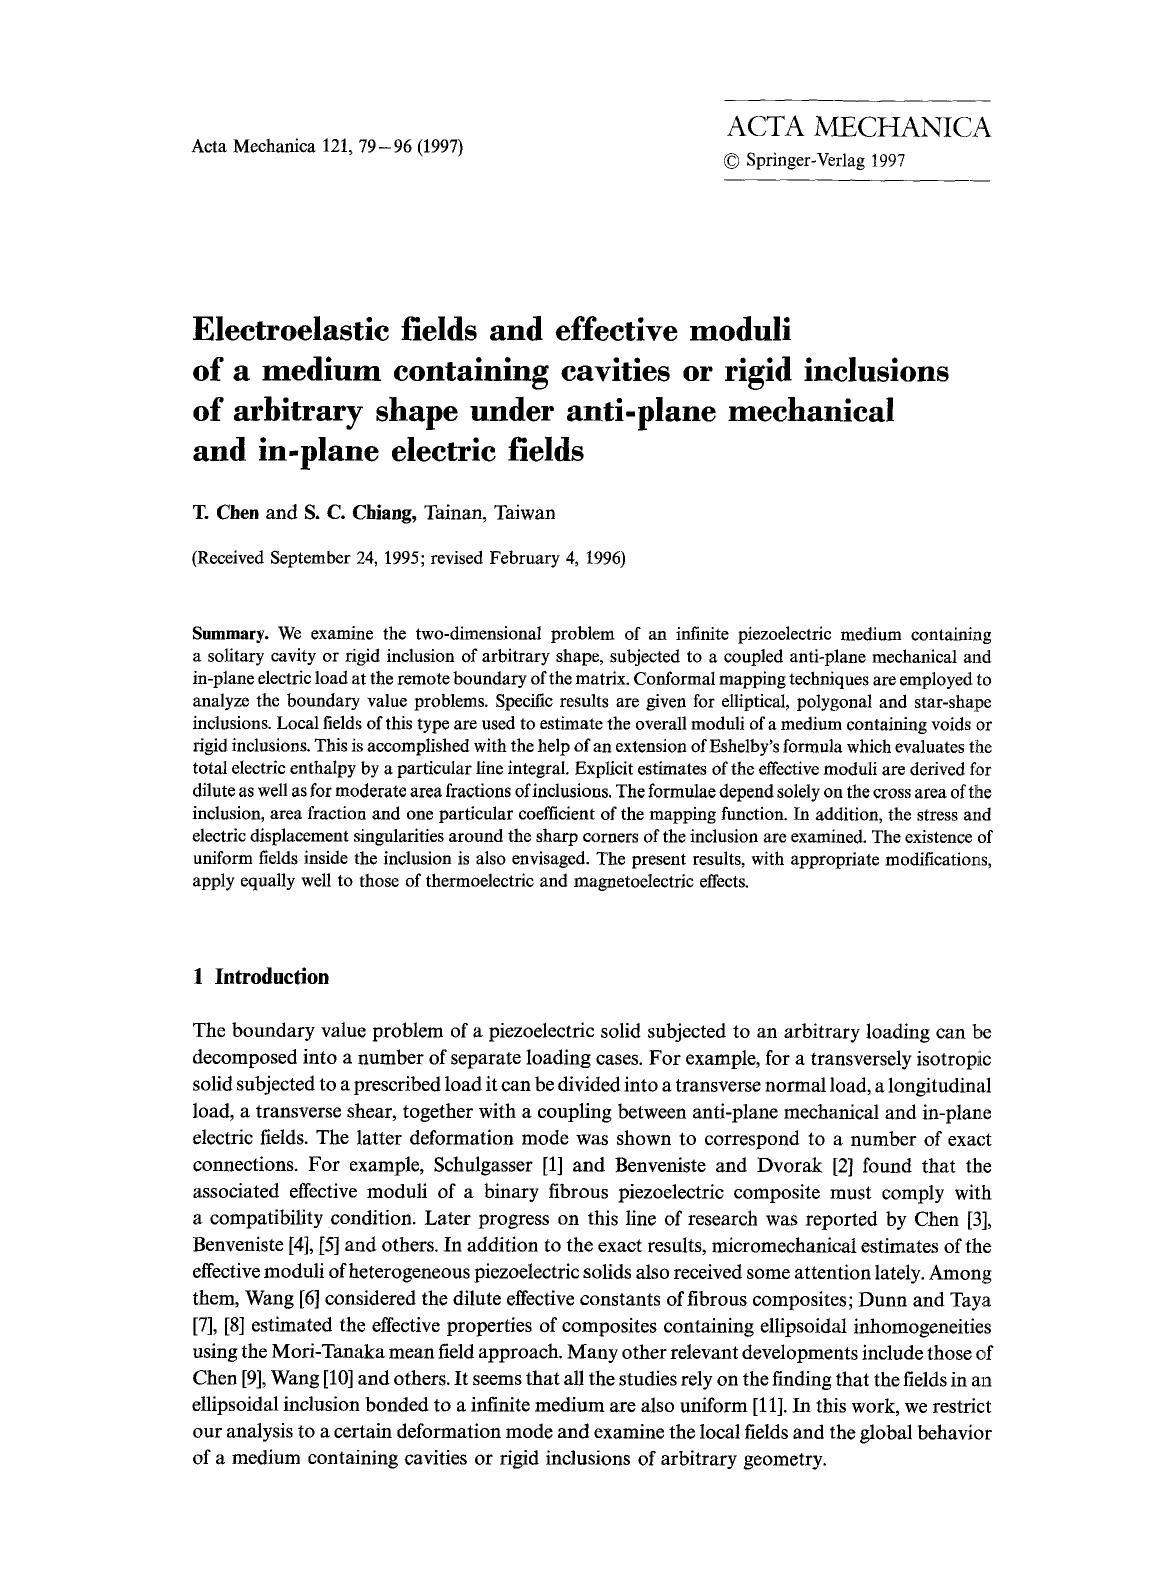 Electroelastic fields and effective moduli of a medium containing cavities or rigid inclusions of arbitrary shape under anti-plane mechanical and in-plane electric fields by Unknown